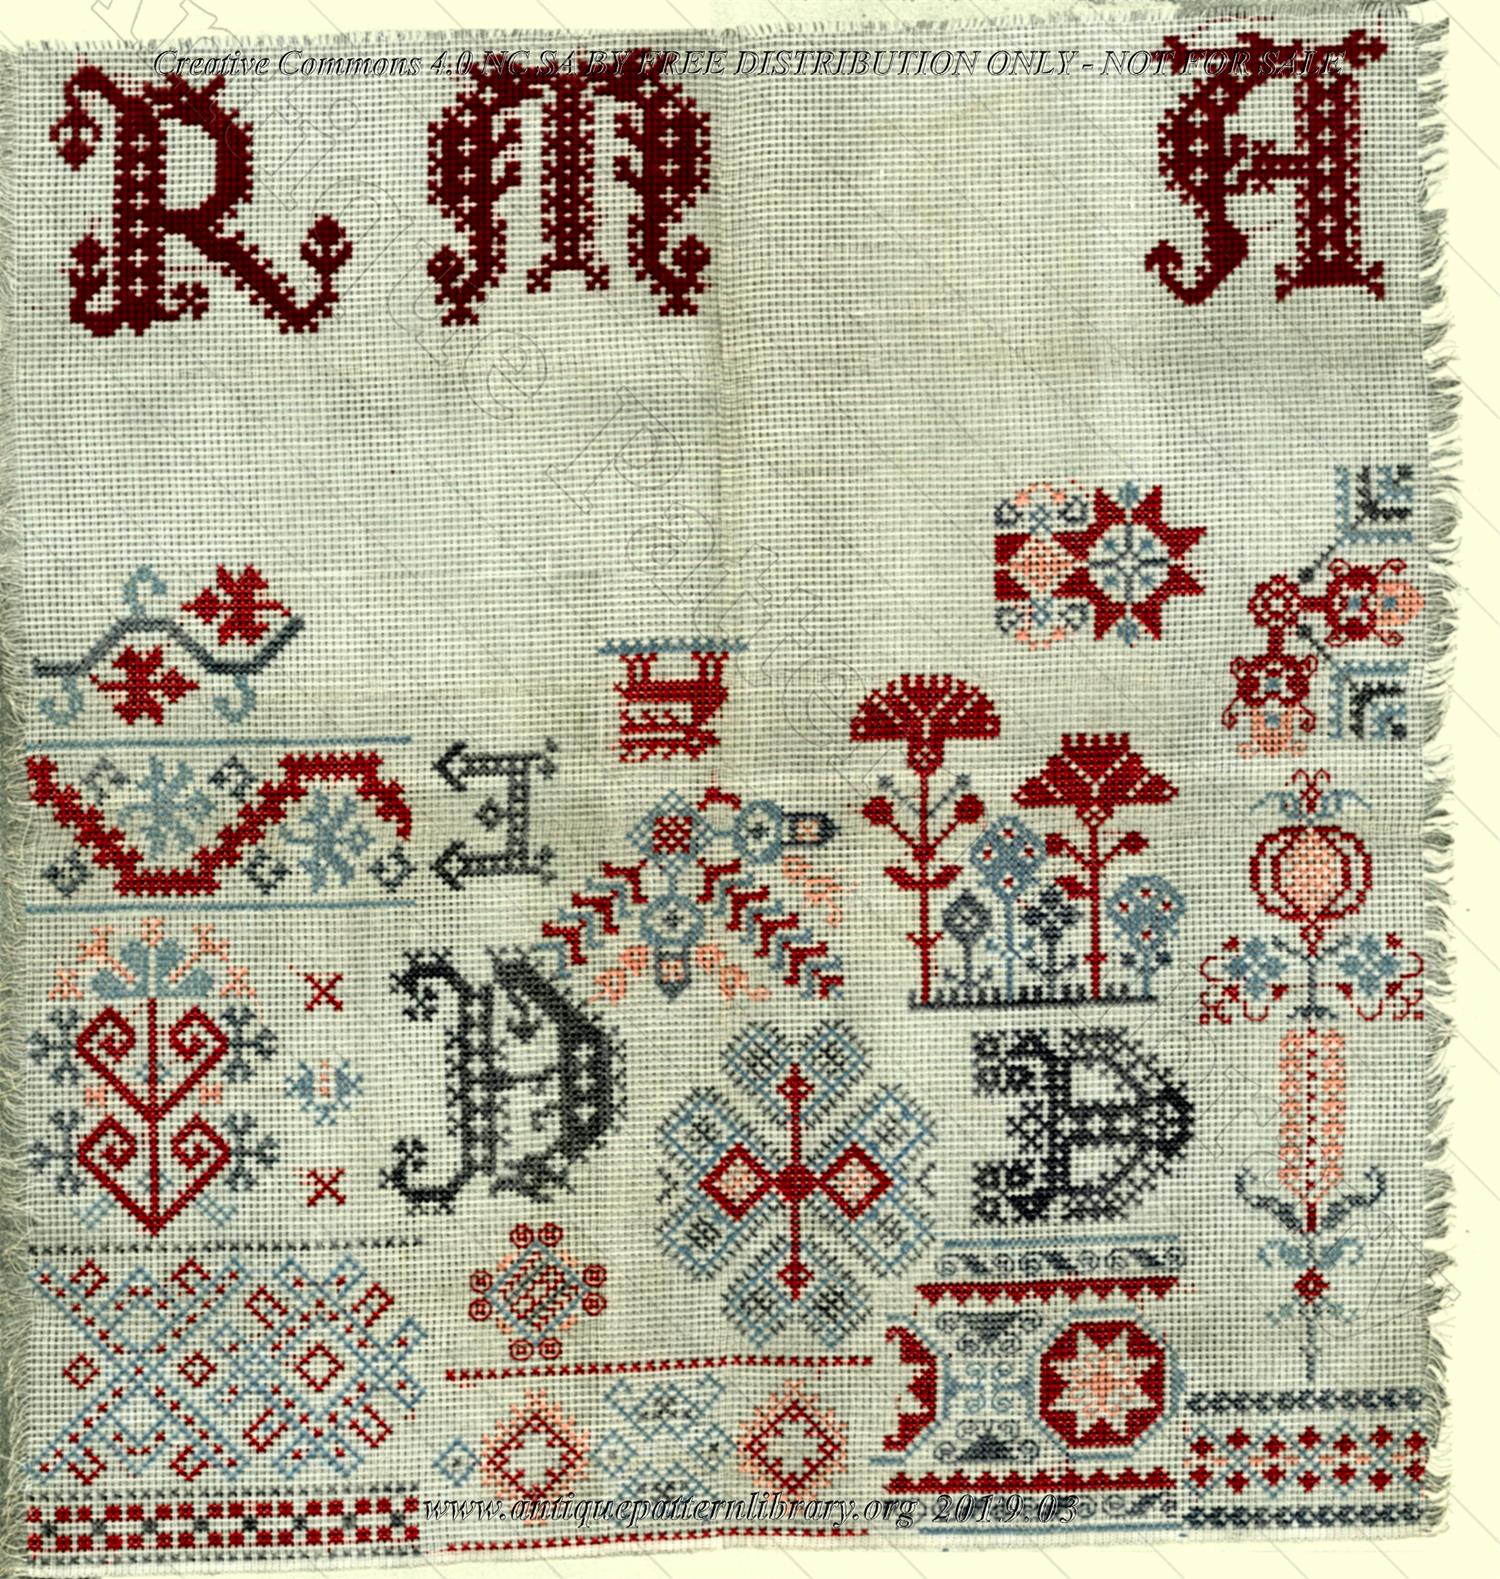 F-JJ004 Unfinished sampler with Frisian letters, in four colors